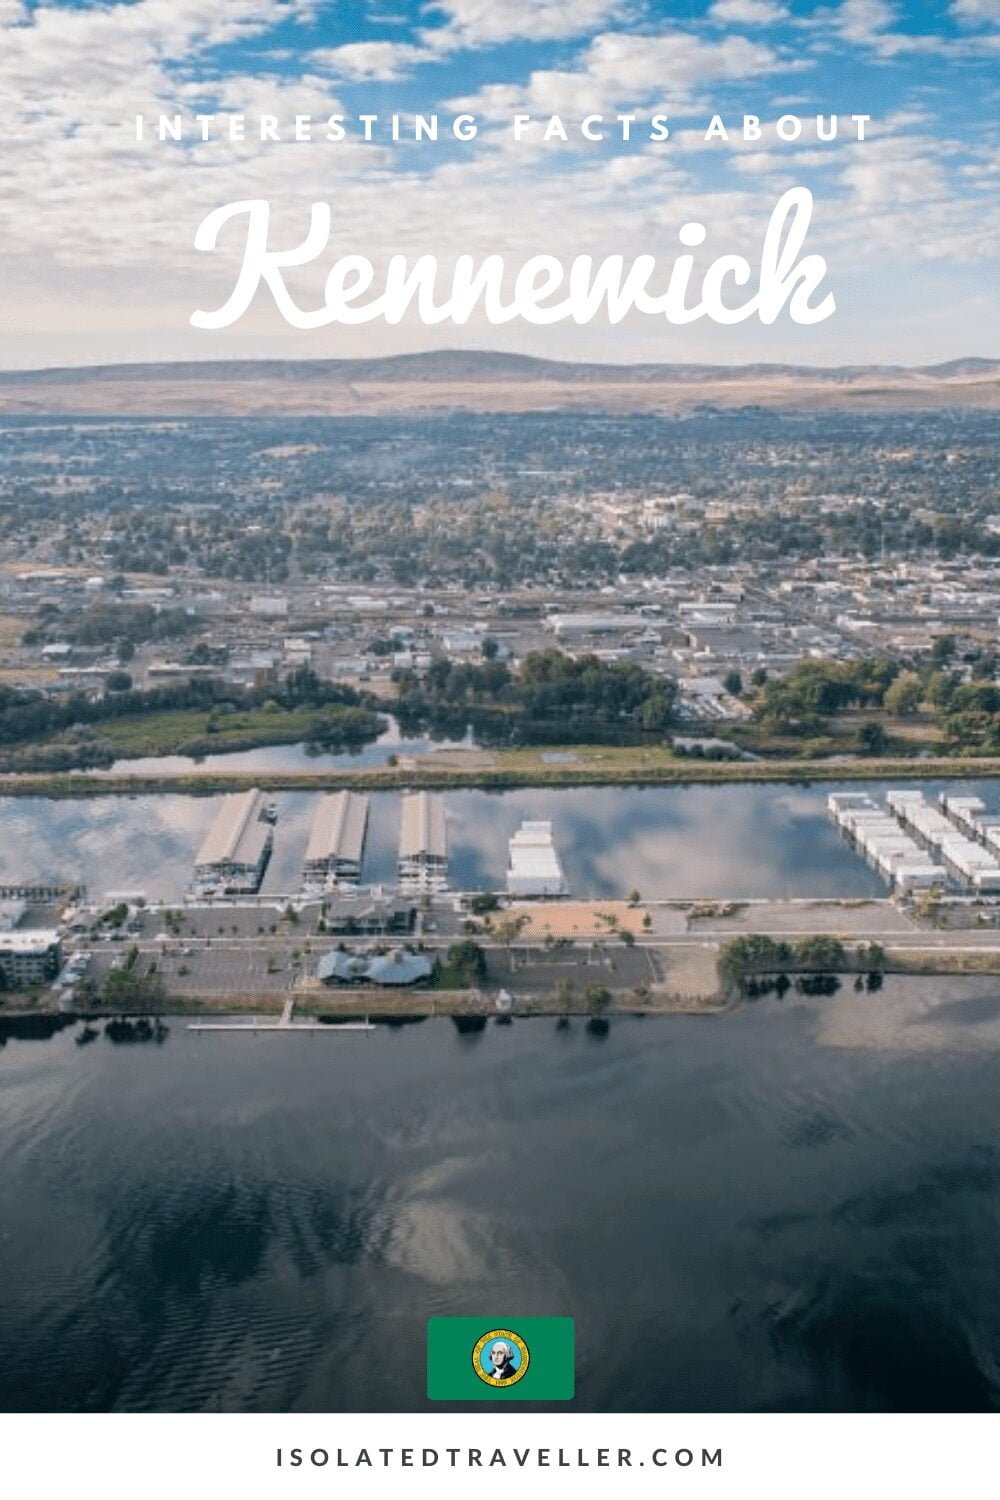 Facts About Kennewick